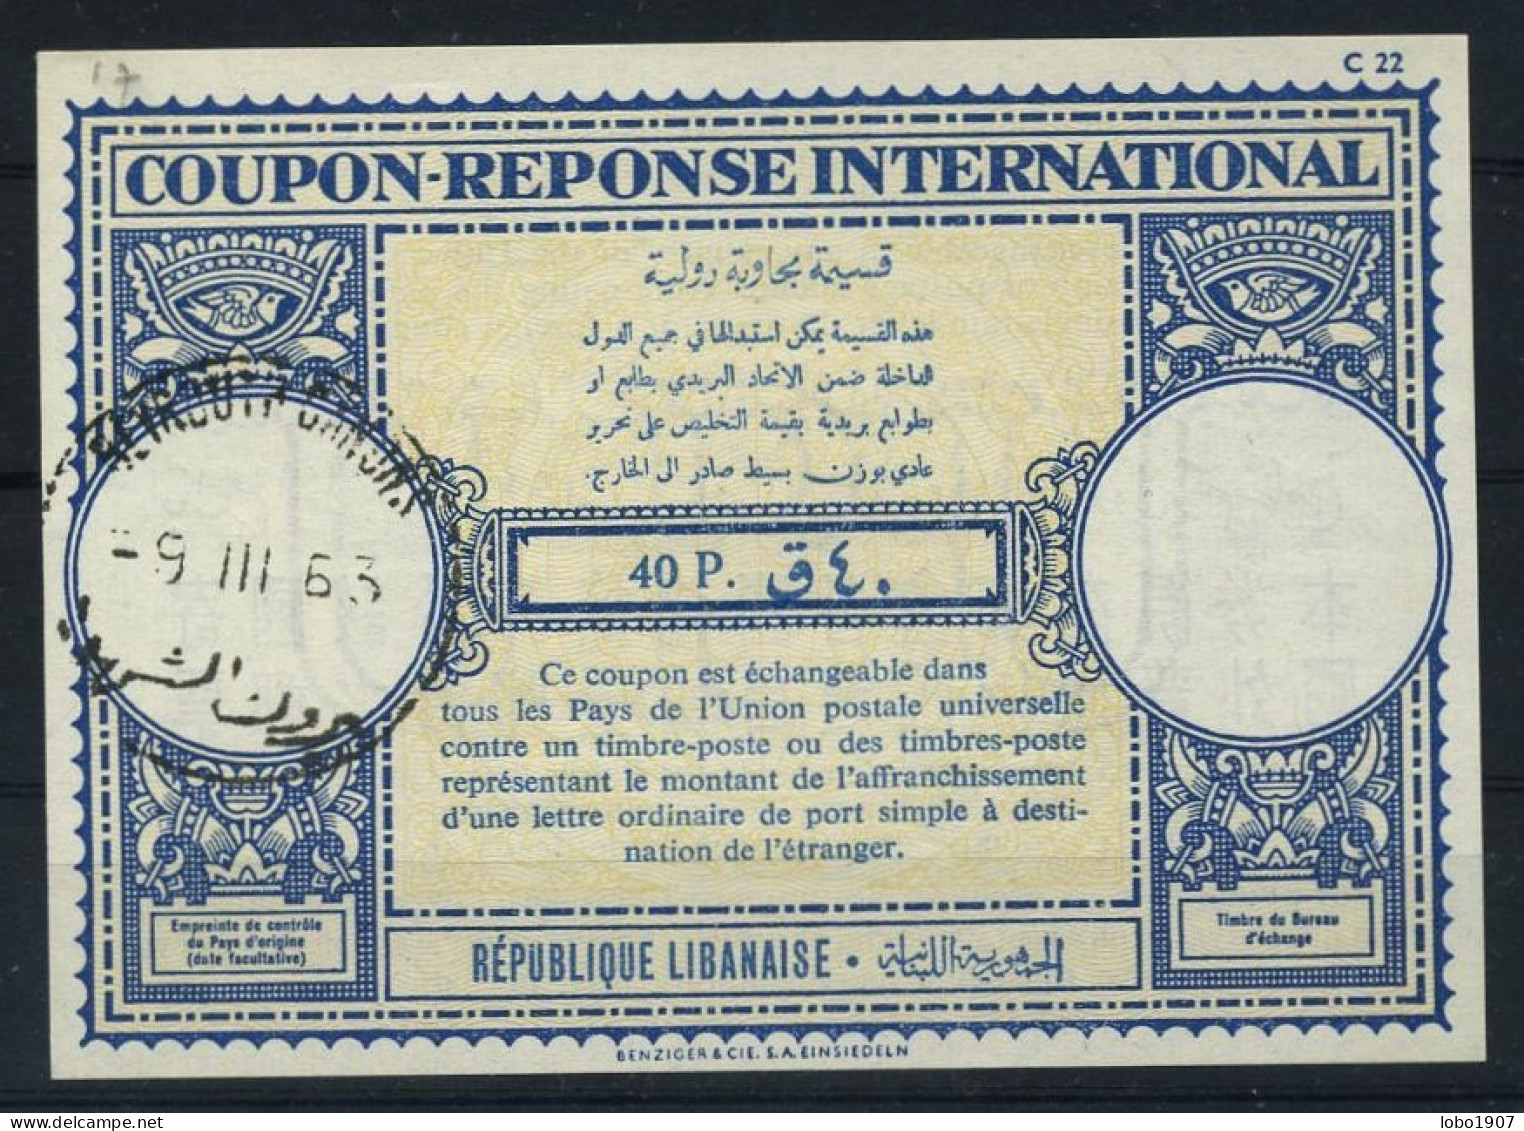 LIBAN LEBANON  Collection 9 International And Arab Union Reply Coupon Reponse Cupon Respuesta IRC IAS See List And Scans - Lebanon